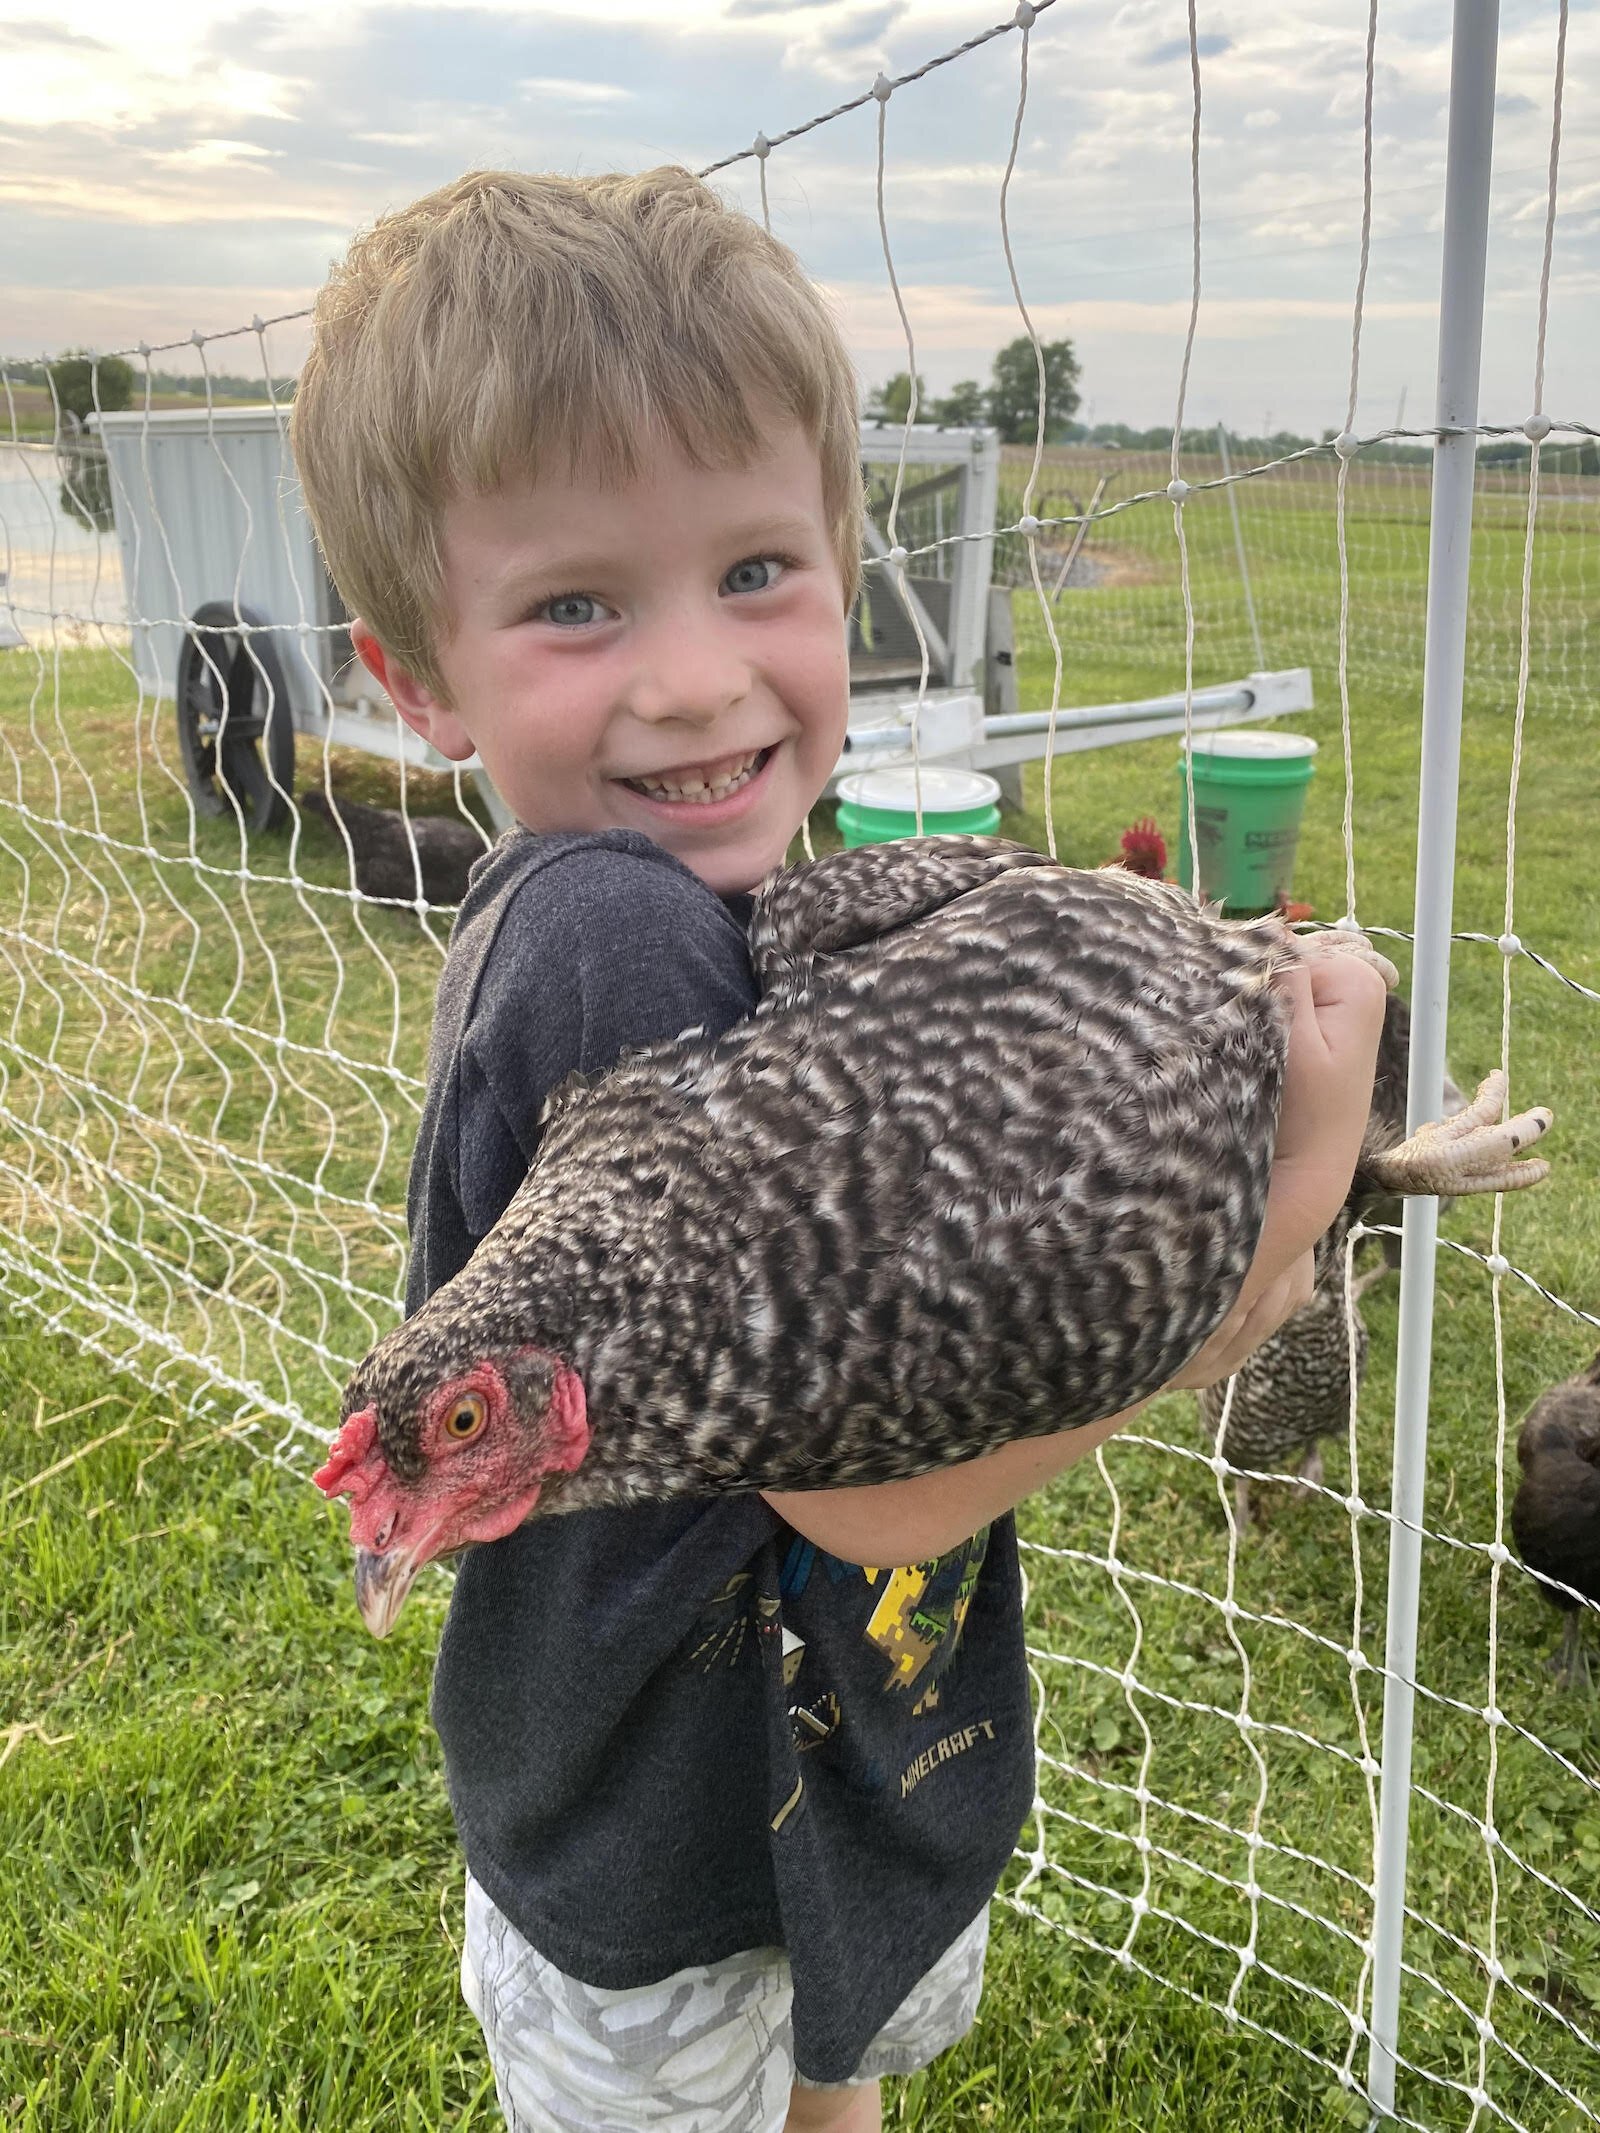 One of Sharp Bradtmueller's sons helping with the chickens on their homestead.